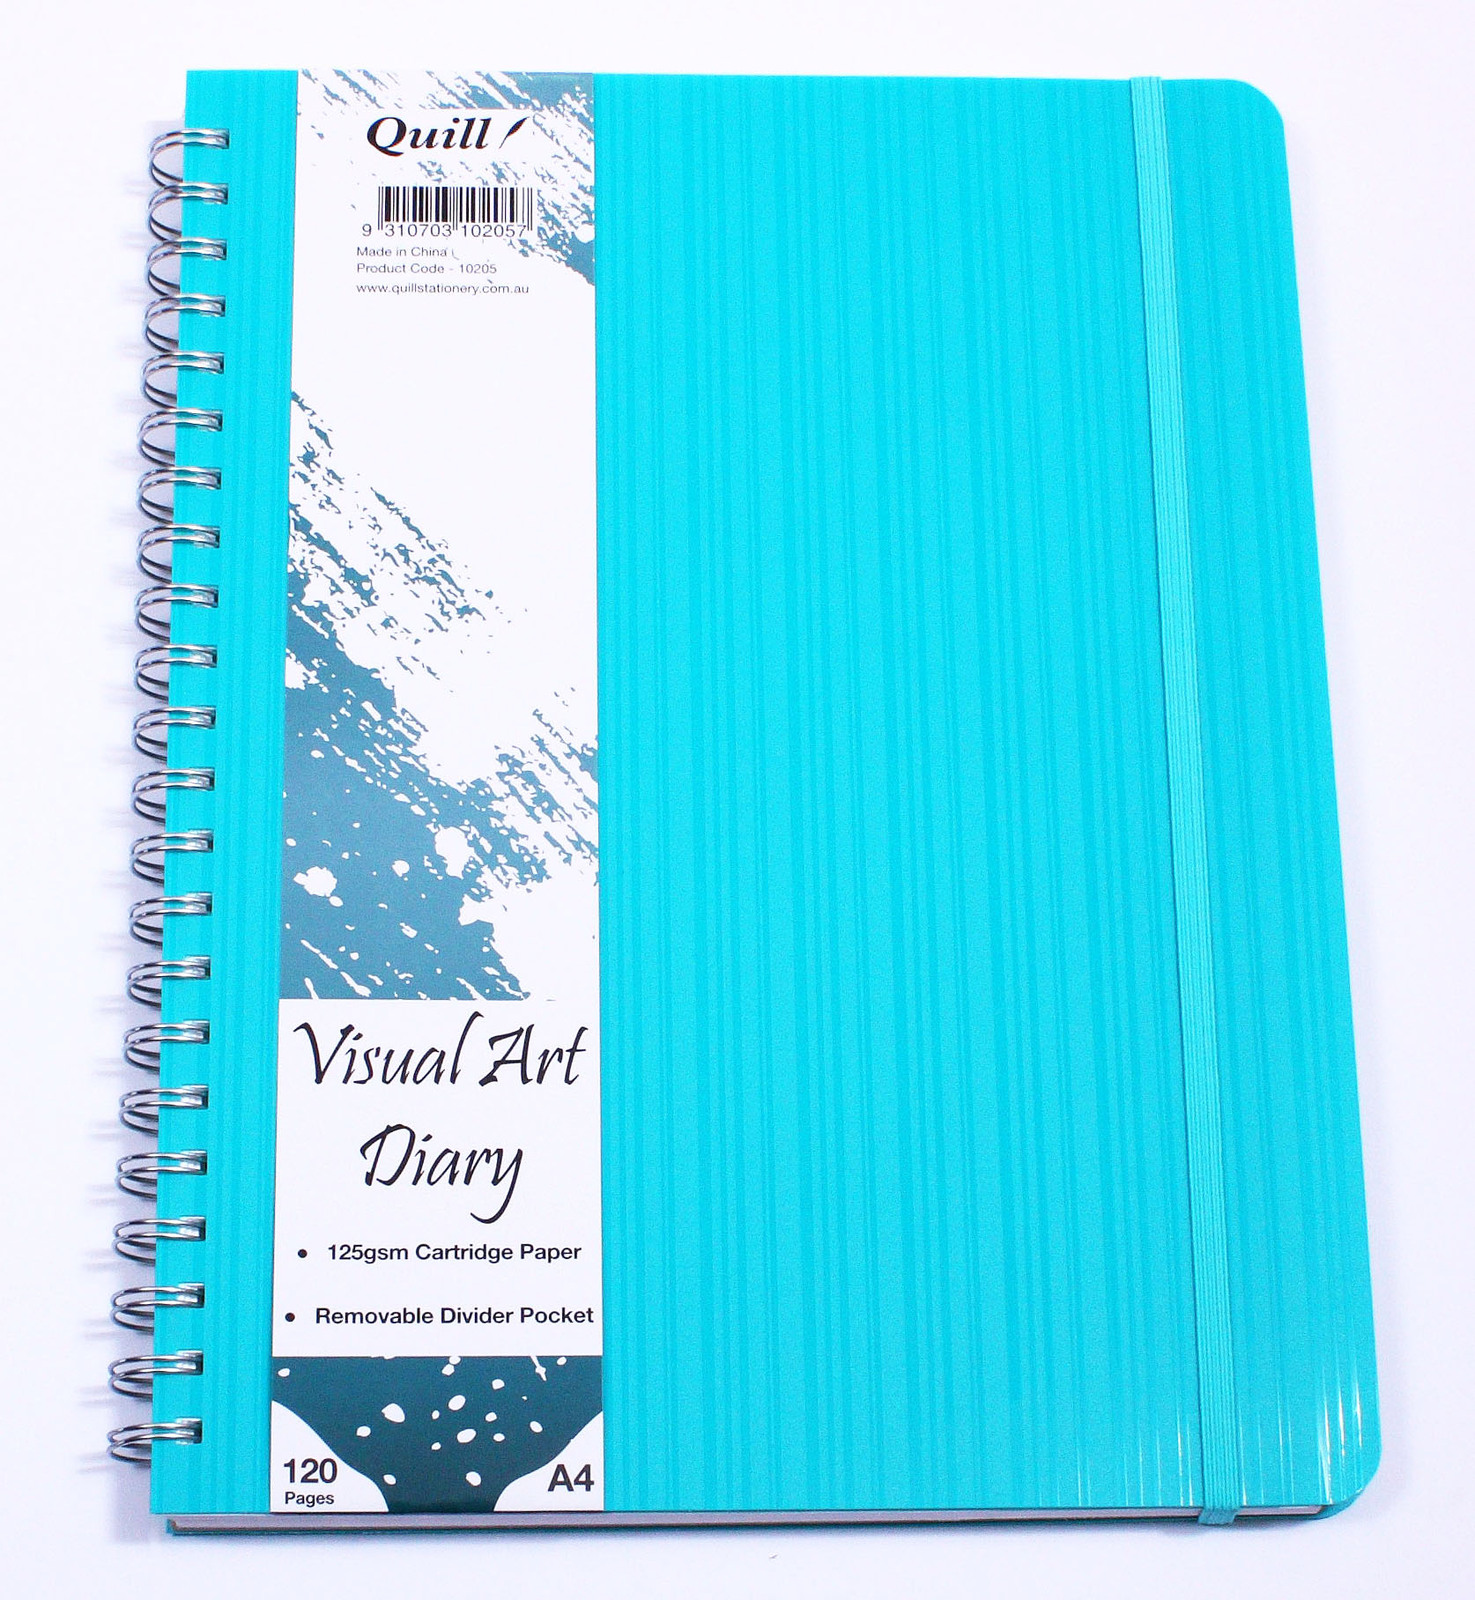 Quill Visual Art Diary A4 Removable divider pocket 120 pages 120gsm cartridge pa 